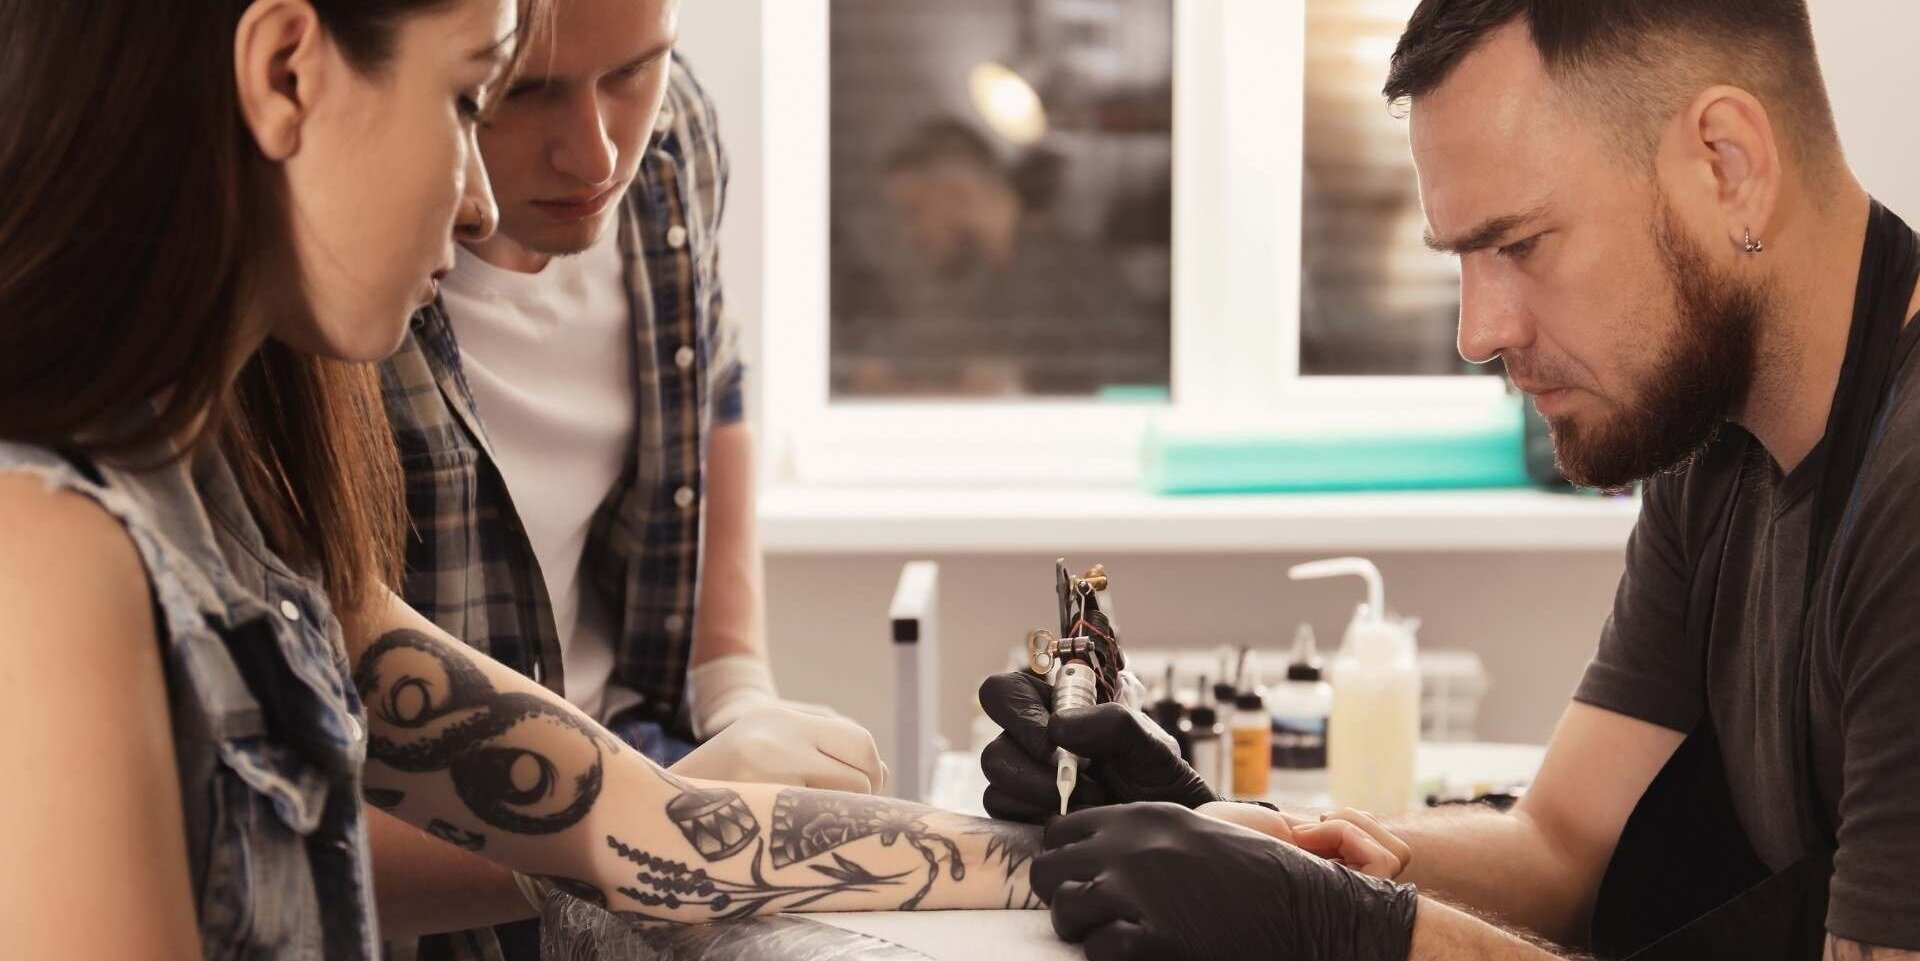 Tattoo Apprenticeship Courses for UK Students - Tattoo Training